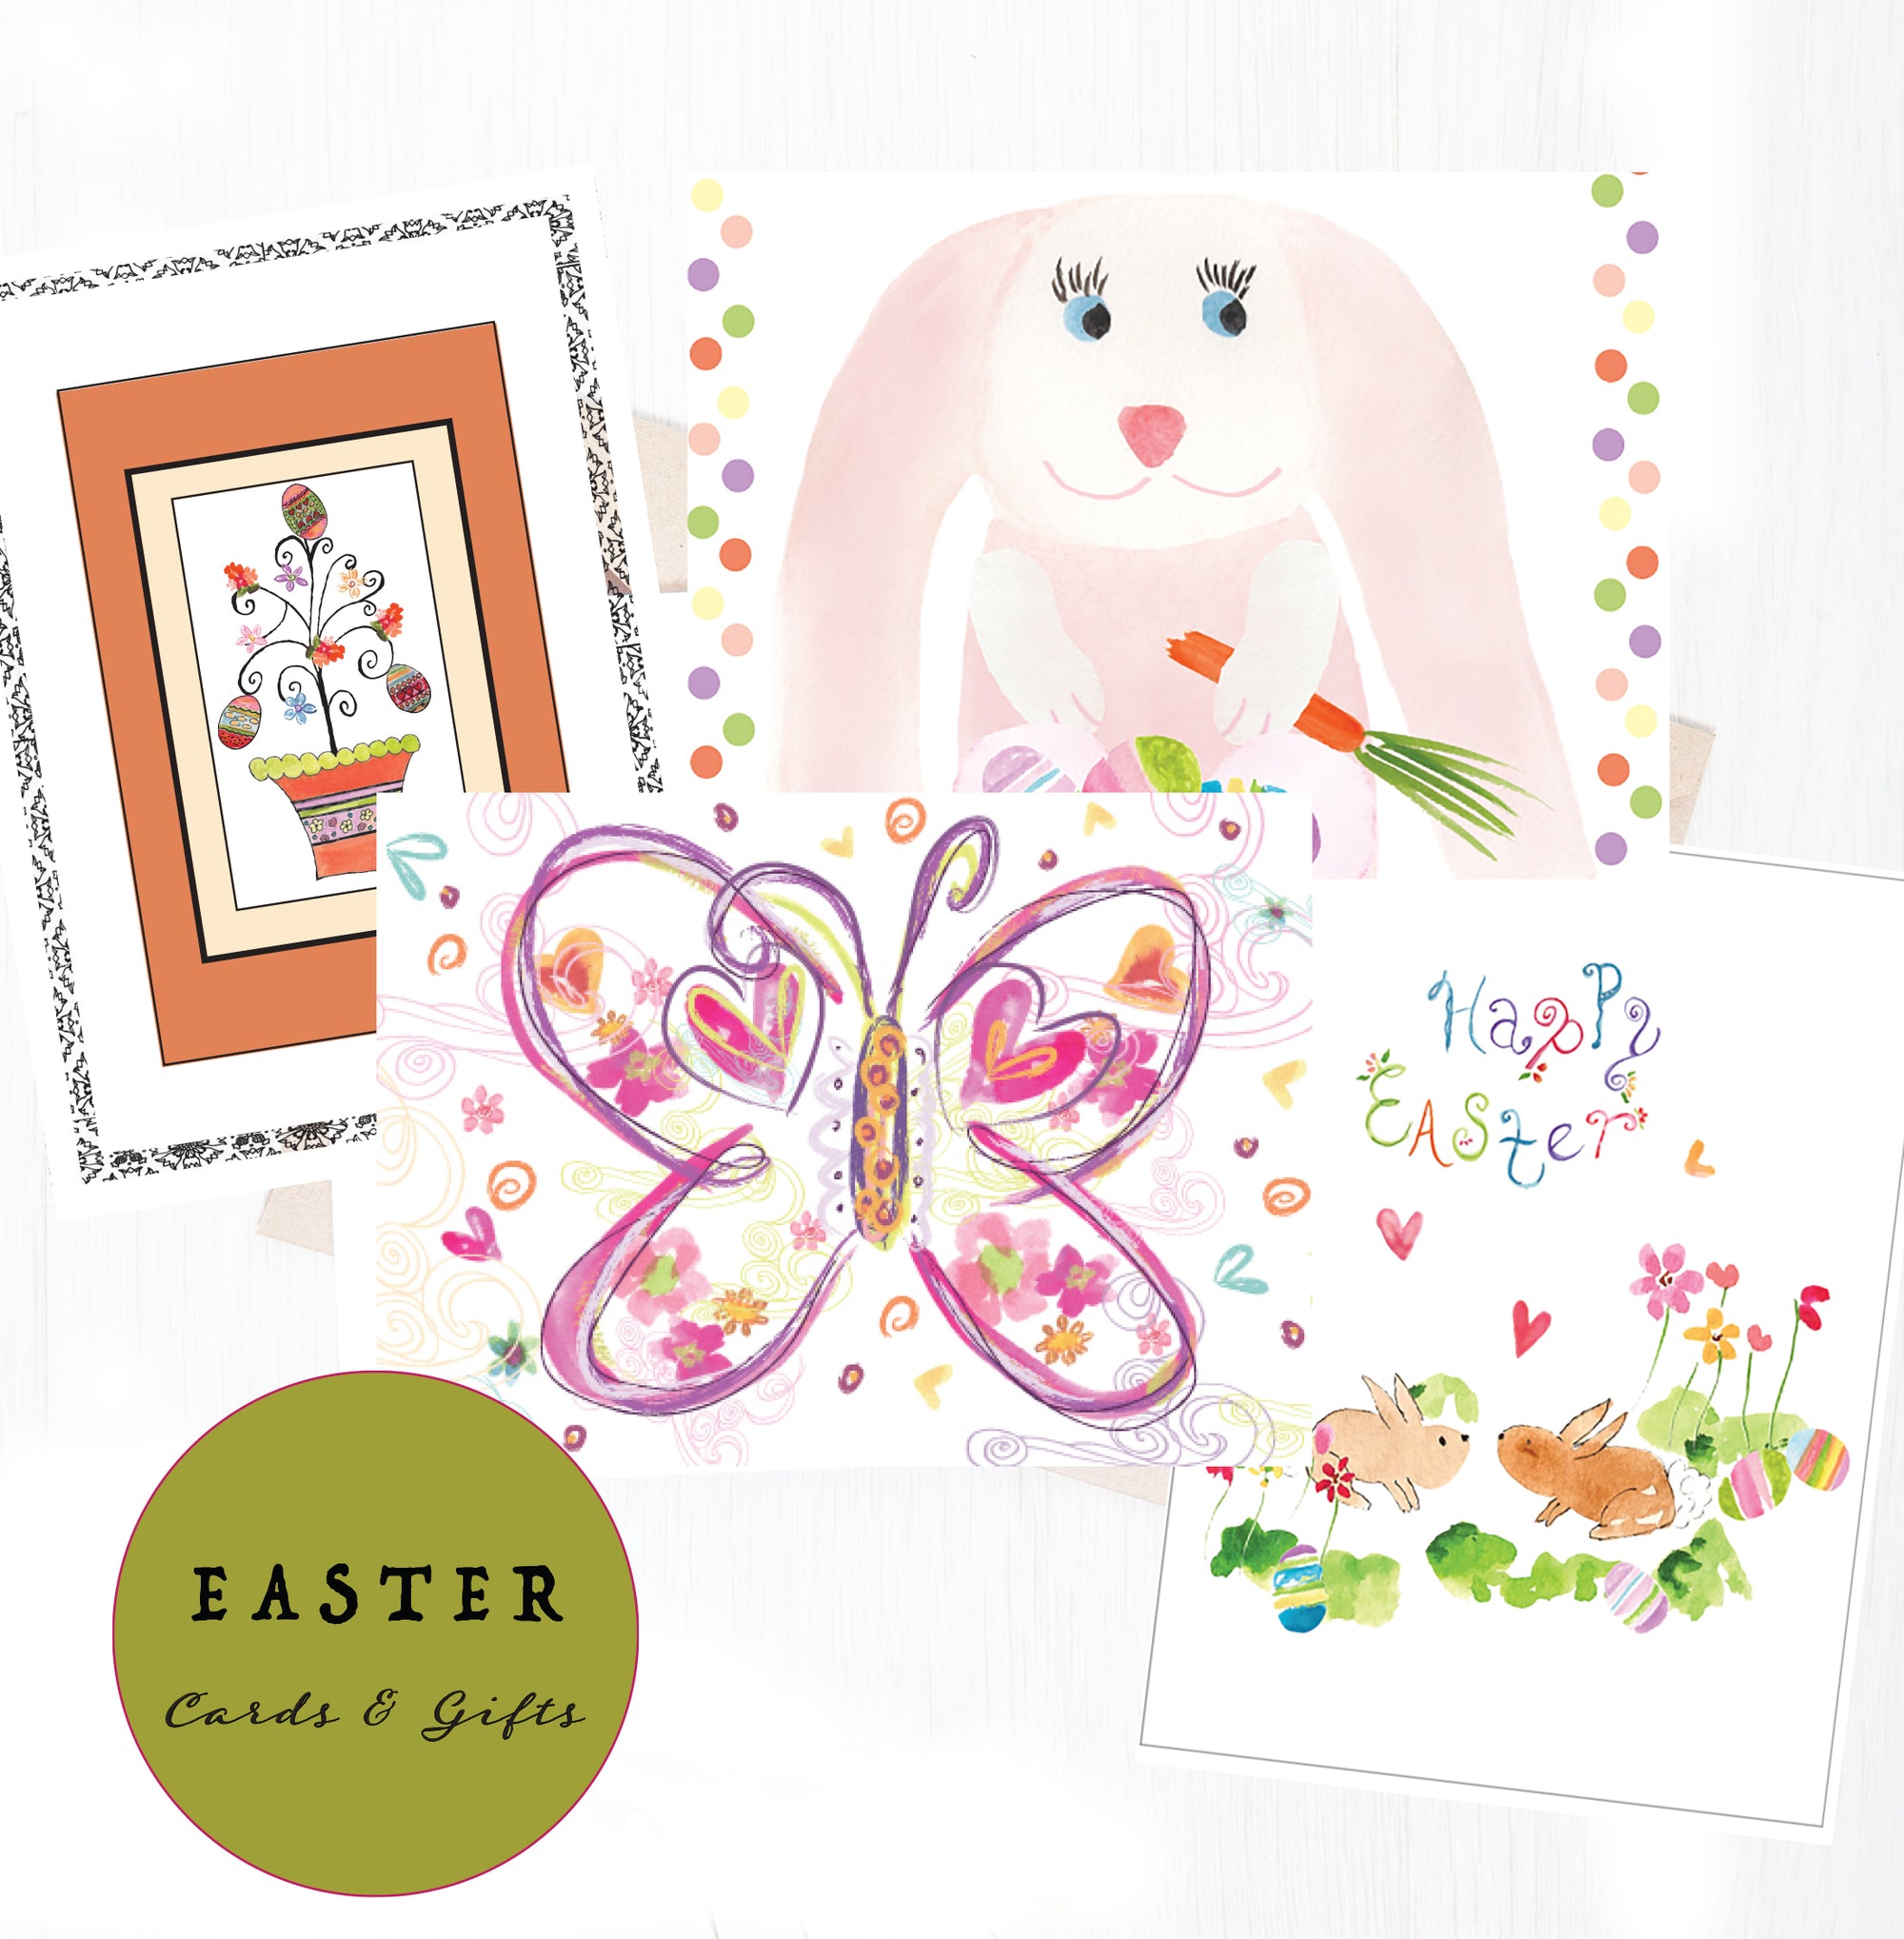 Fun Easter Cards and Gifts!